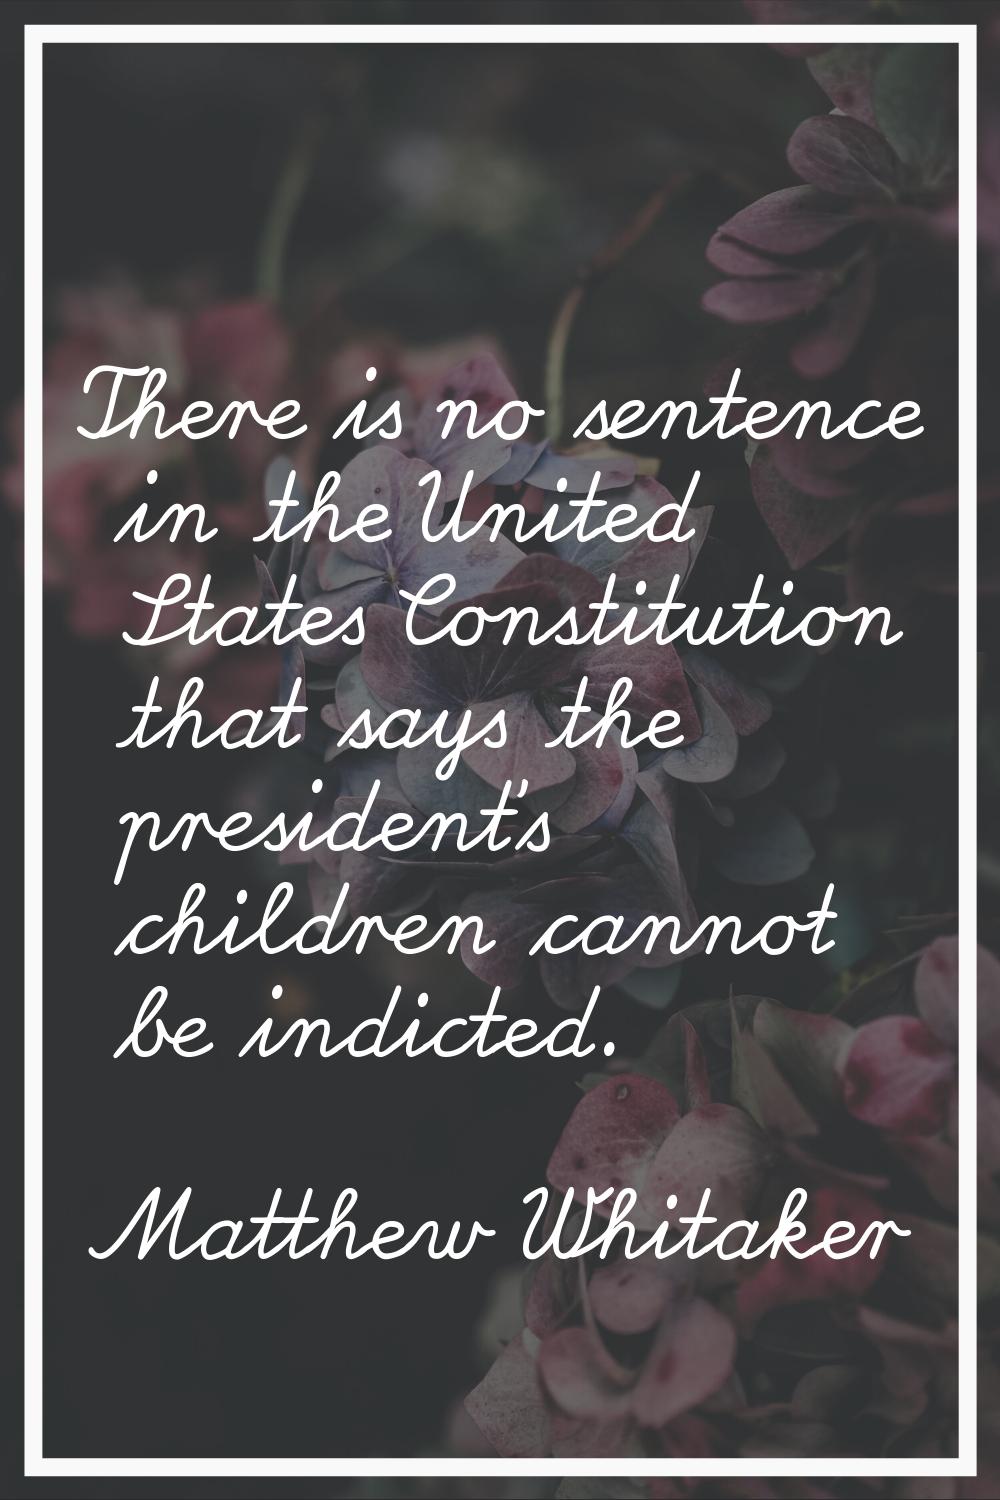 There is no sentence in the United States Constitution that says the president's children cannot be